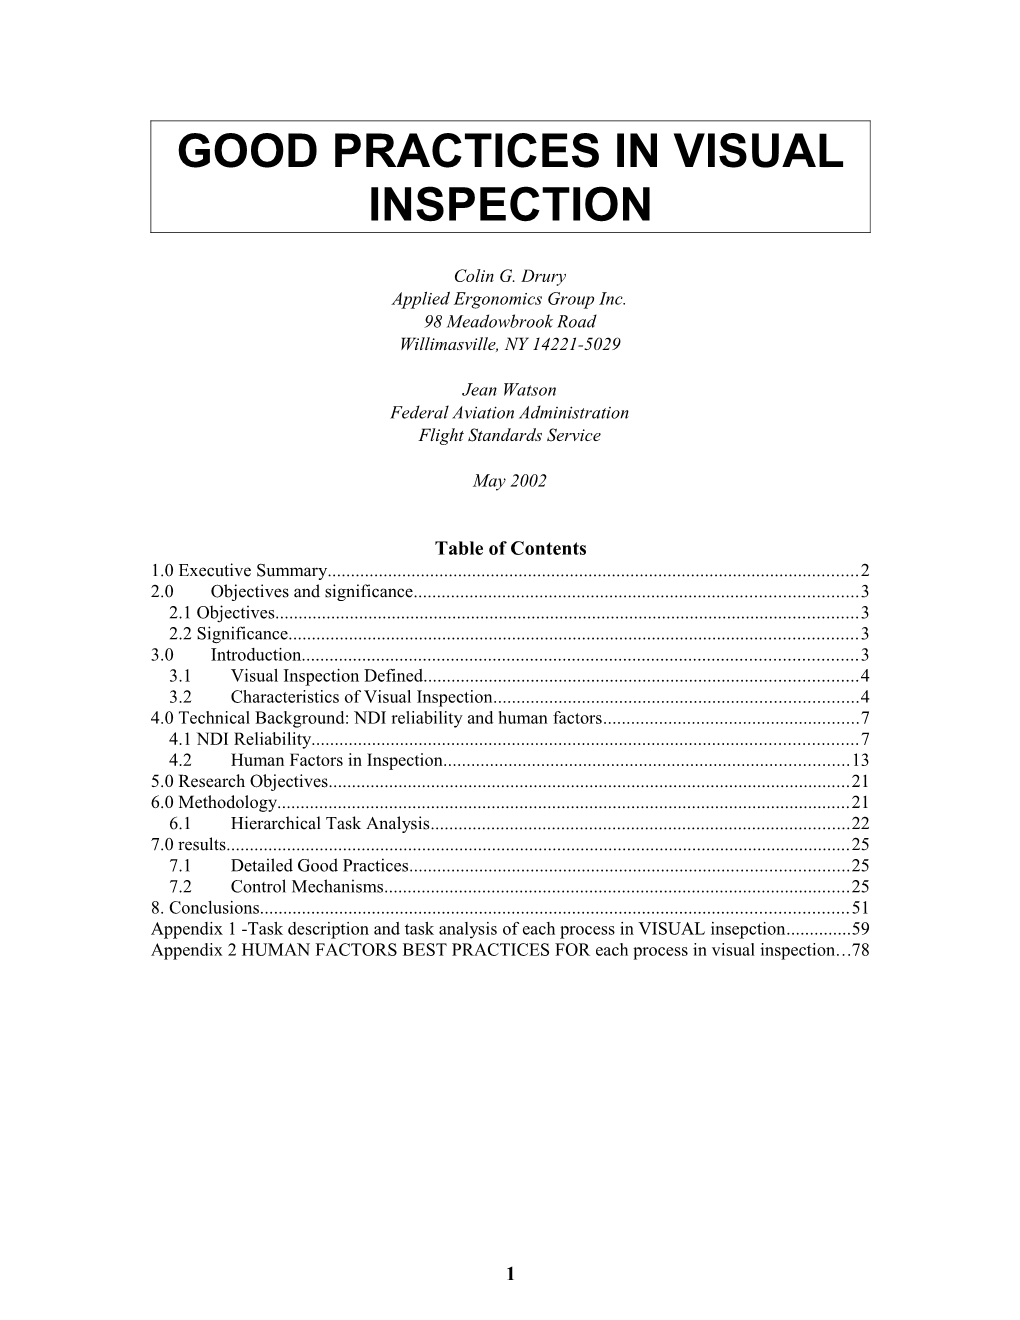 Human Factors Good Practices in Visual Inspection